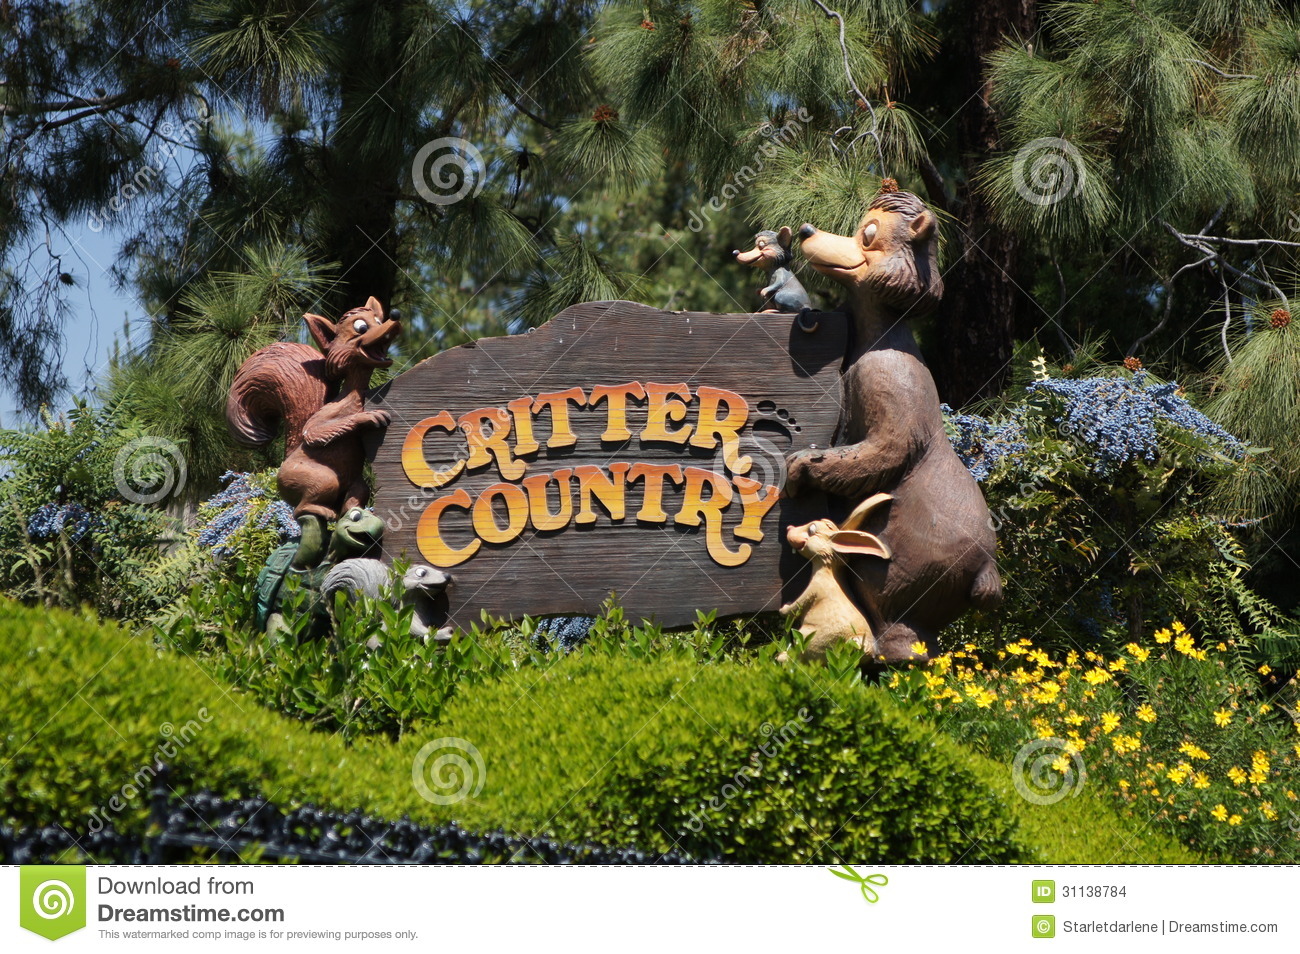     Disneyland Where You Can Ride Splash Mountain And Other Rides At The